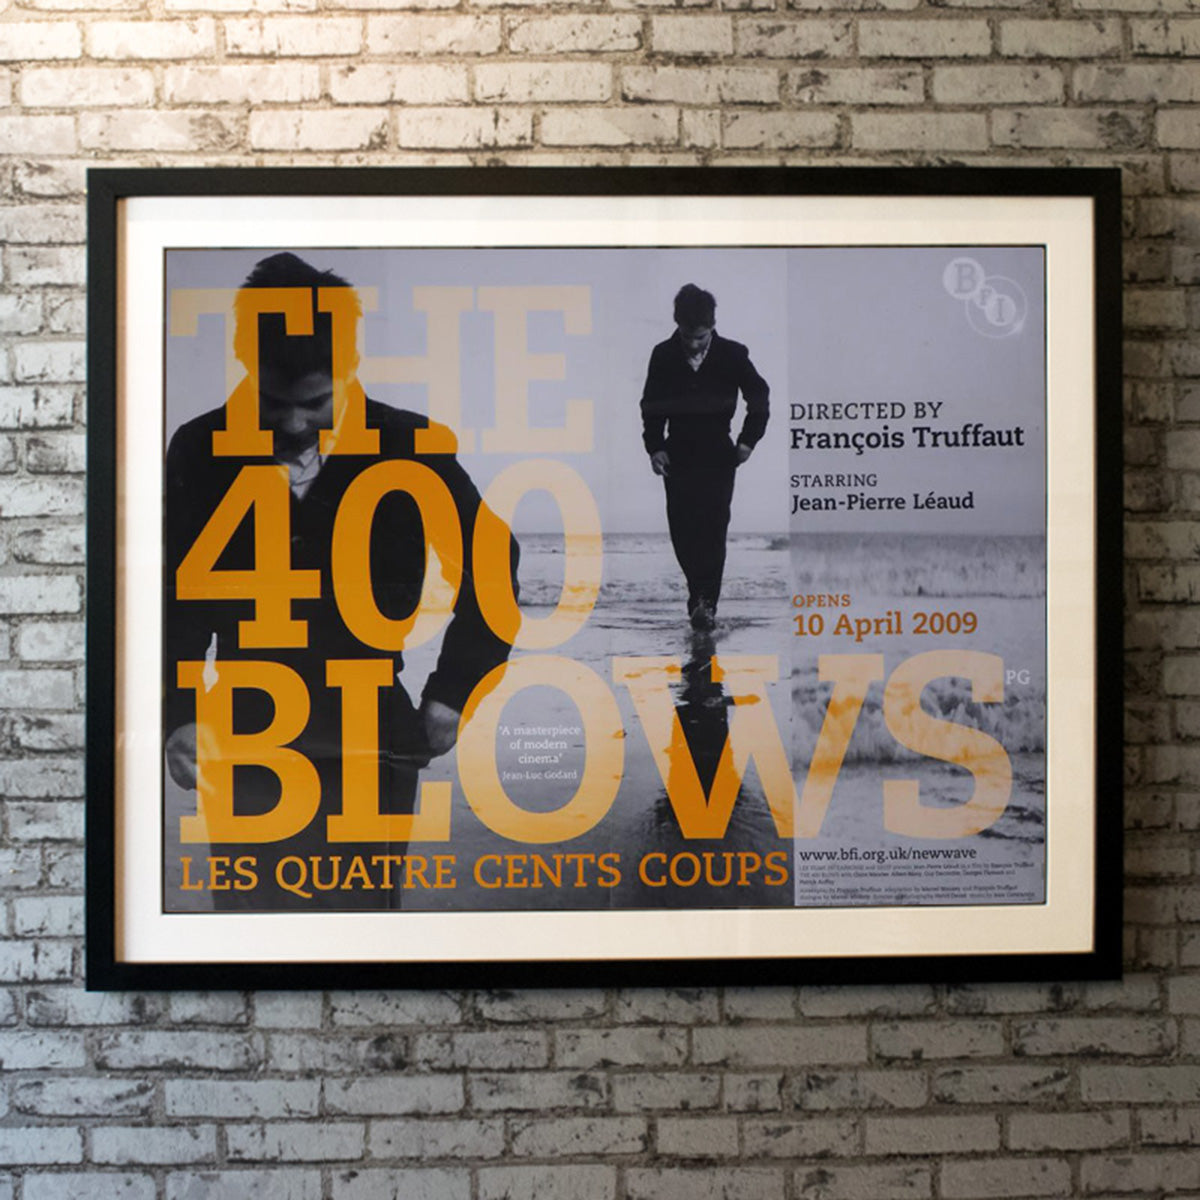 Original Movie Poster of 400 Blows, The (2009R)